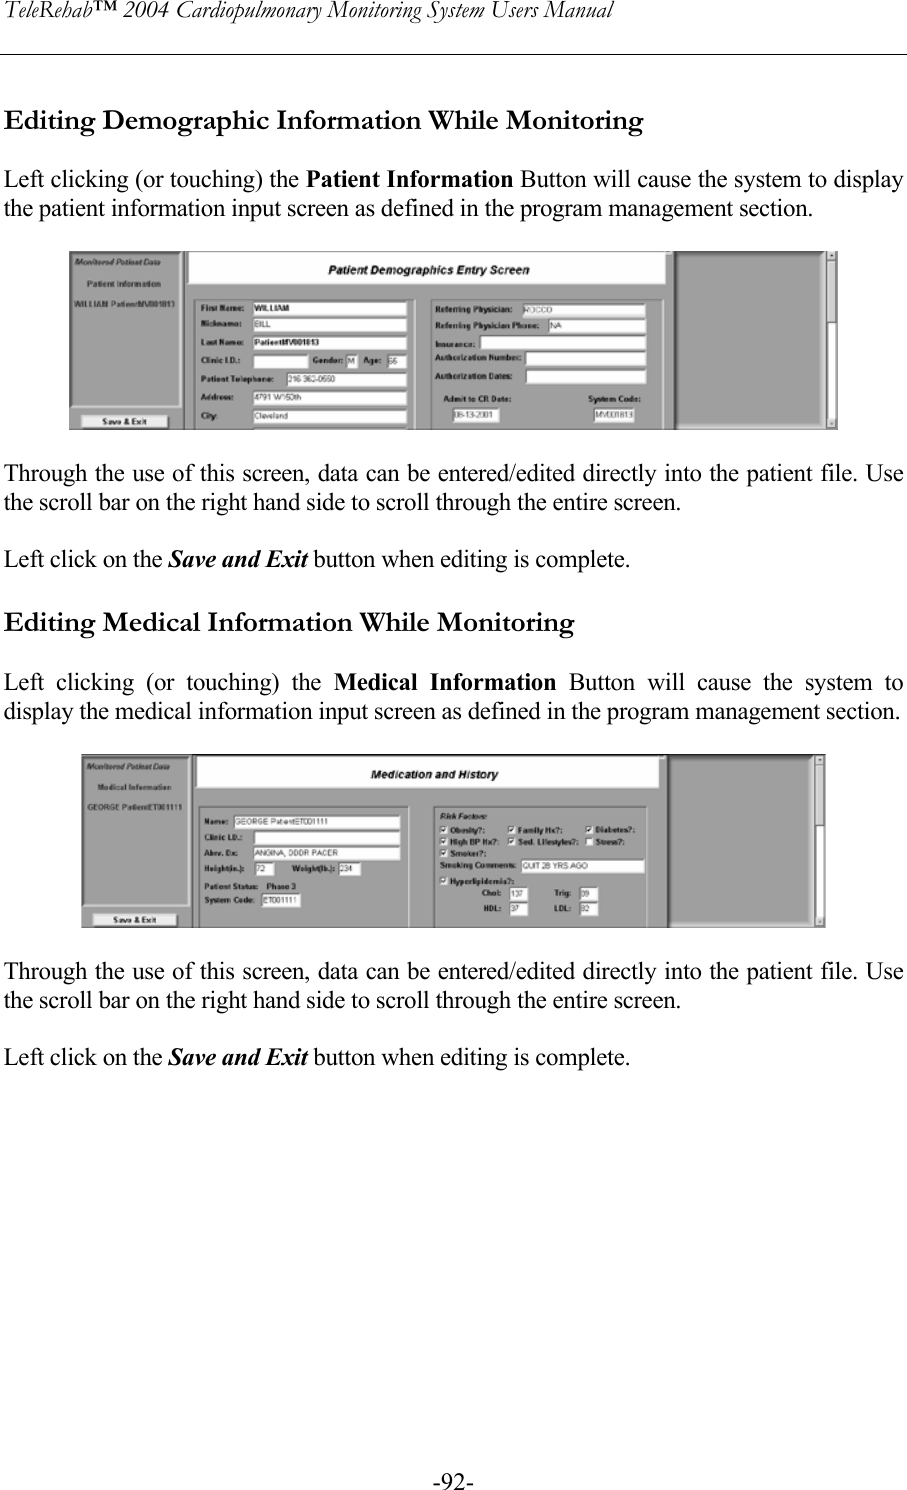 TeleRehab™ 2004 Cardiopulmonary Monitoring System Users Manual    -92- Editing Demographic Information While Monitoring  Left clicking (or touching) the Patient Information Button will cause the system to display the patient information input screen as defined in the program management section.    Through the use of this screen, data can be entered/edited directly into the patient file. Use the scroll bar on the right hand side to scroll through the entire screen.  Left click on the Save and Exit button when editing is complete.  Editing Medical Information While Monitoring  Left clicking (or touching) the Medical Information Button will cause the system to display the medical information input screen as defined in the program management section.    Through the use of this screen, data can be entered/edited directly into the patient file. Use the scroll bar on the right hand side to scroll through the entire screen.  Left click on the Save and Exit button when editing is complete.  